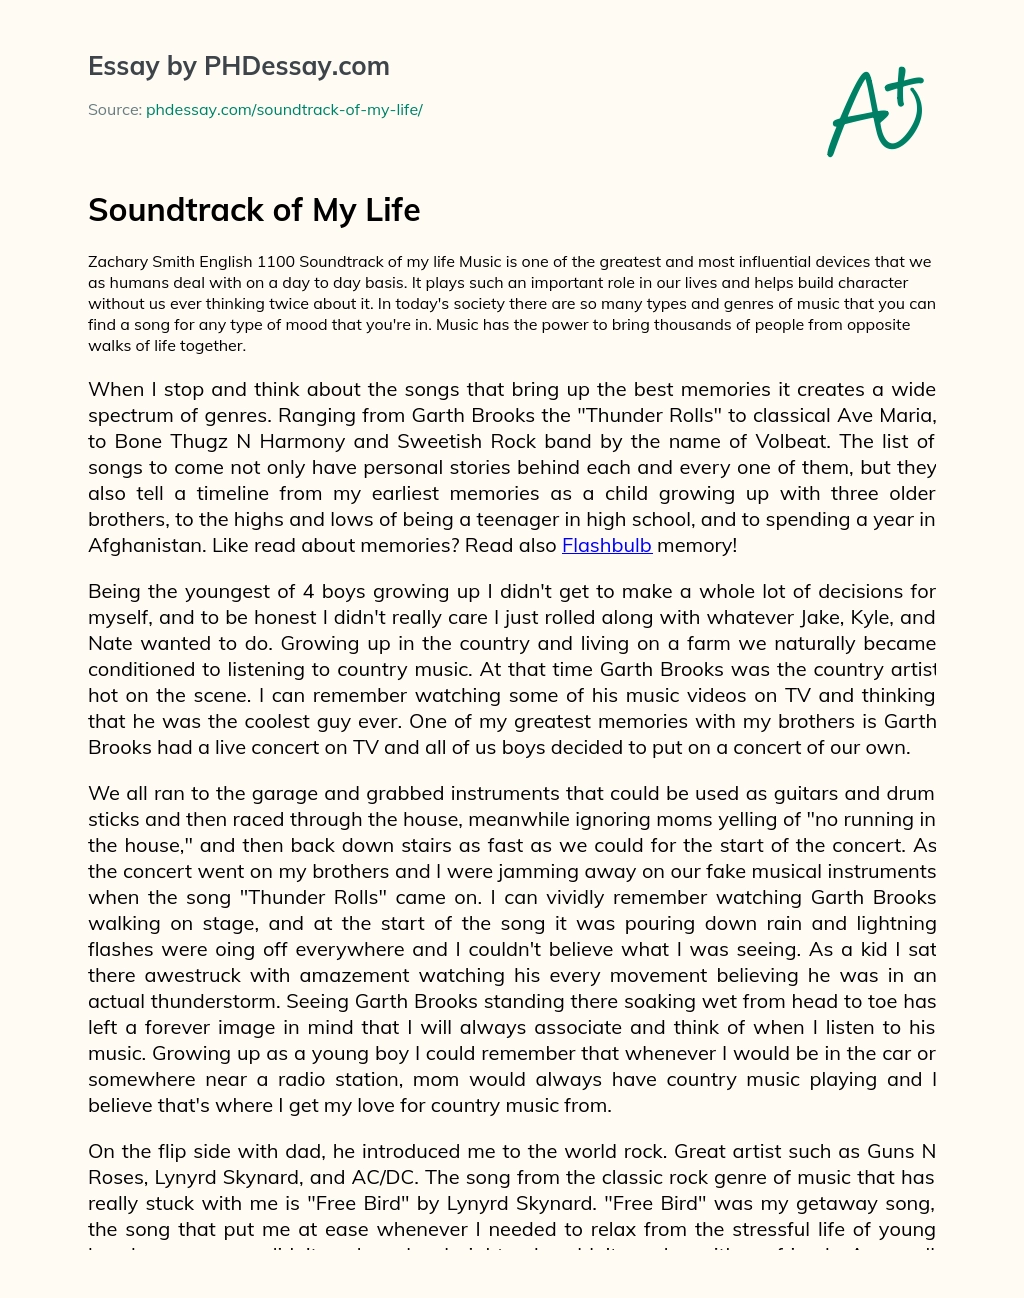 soundtrack of your life college essay